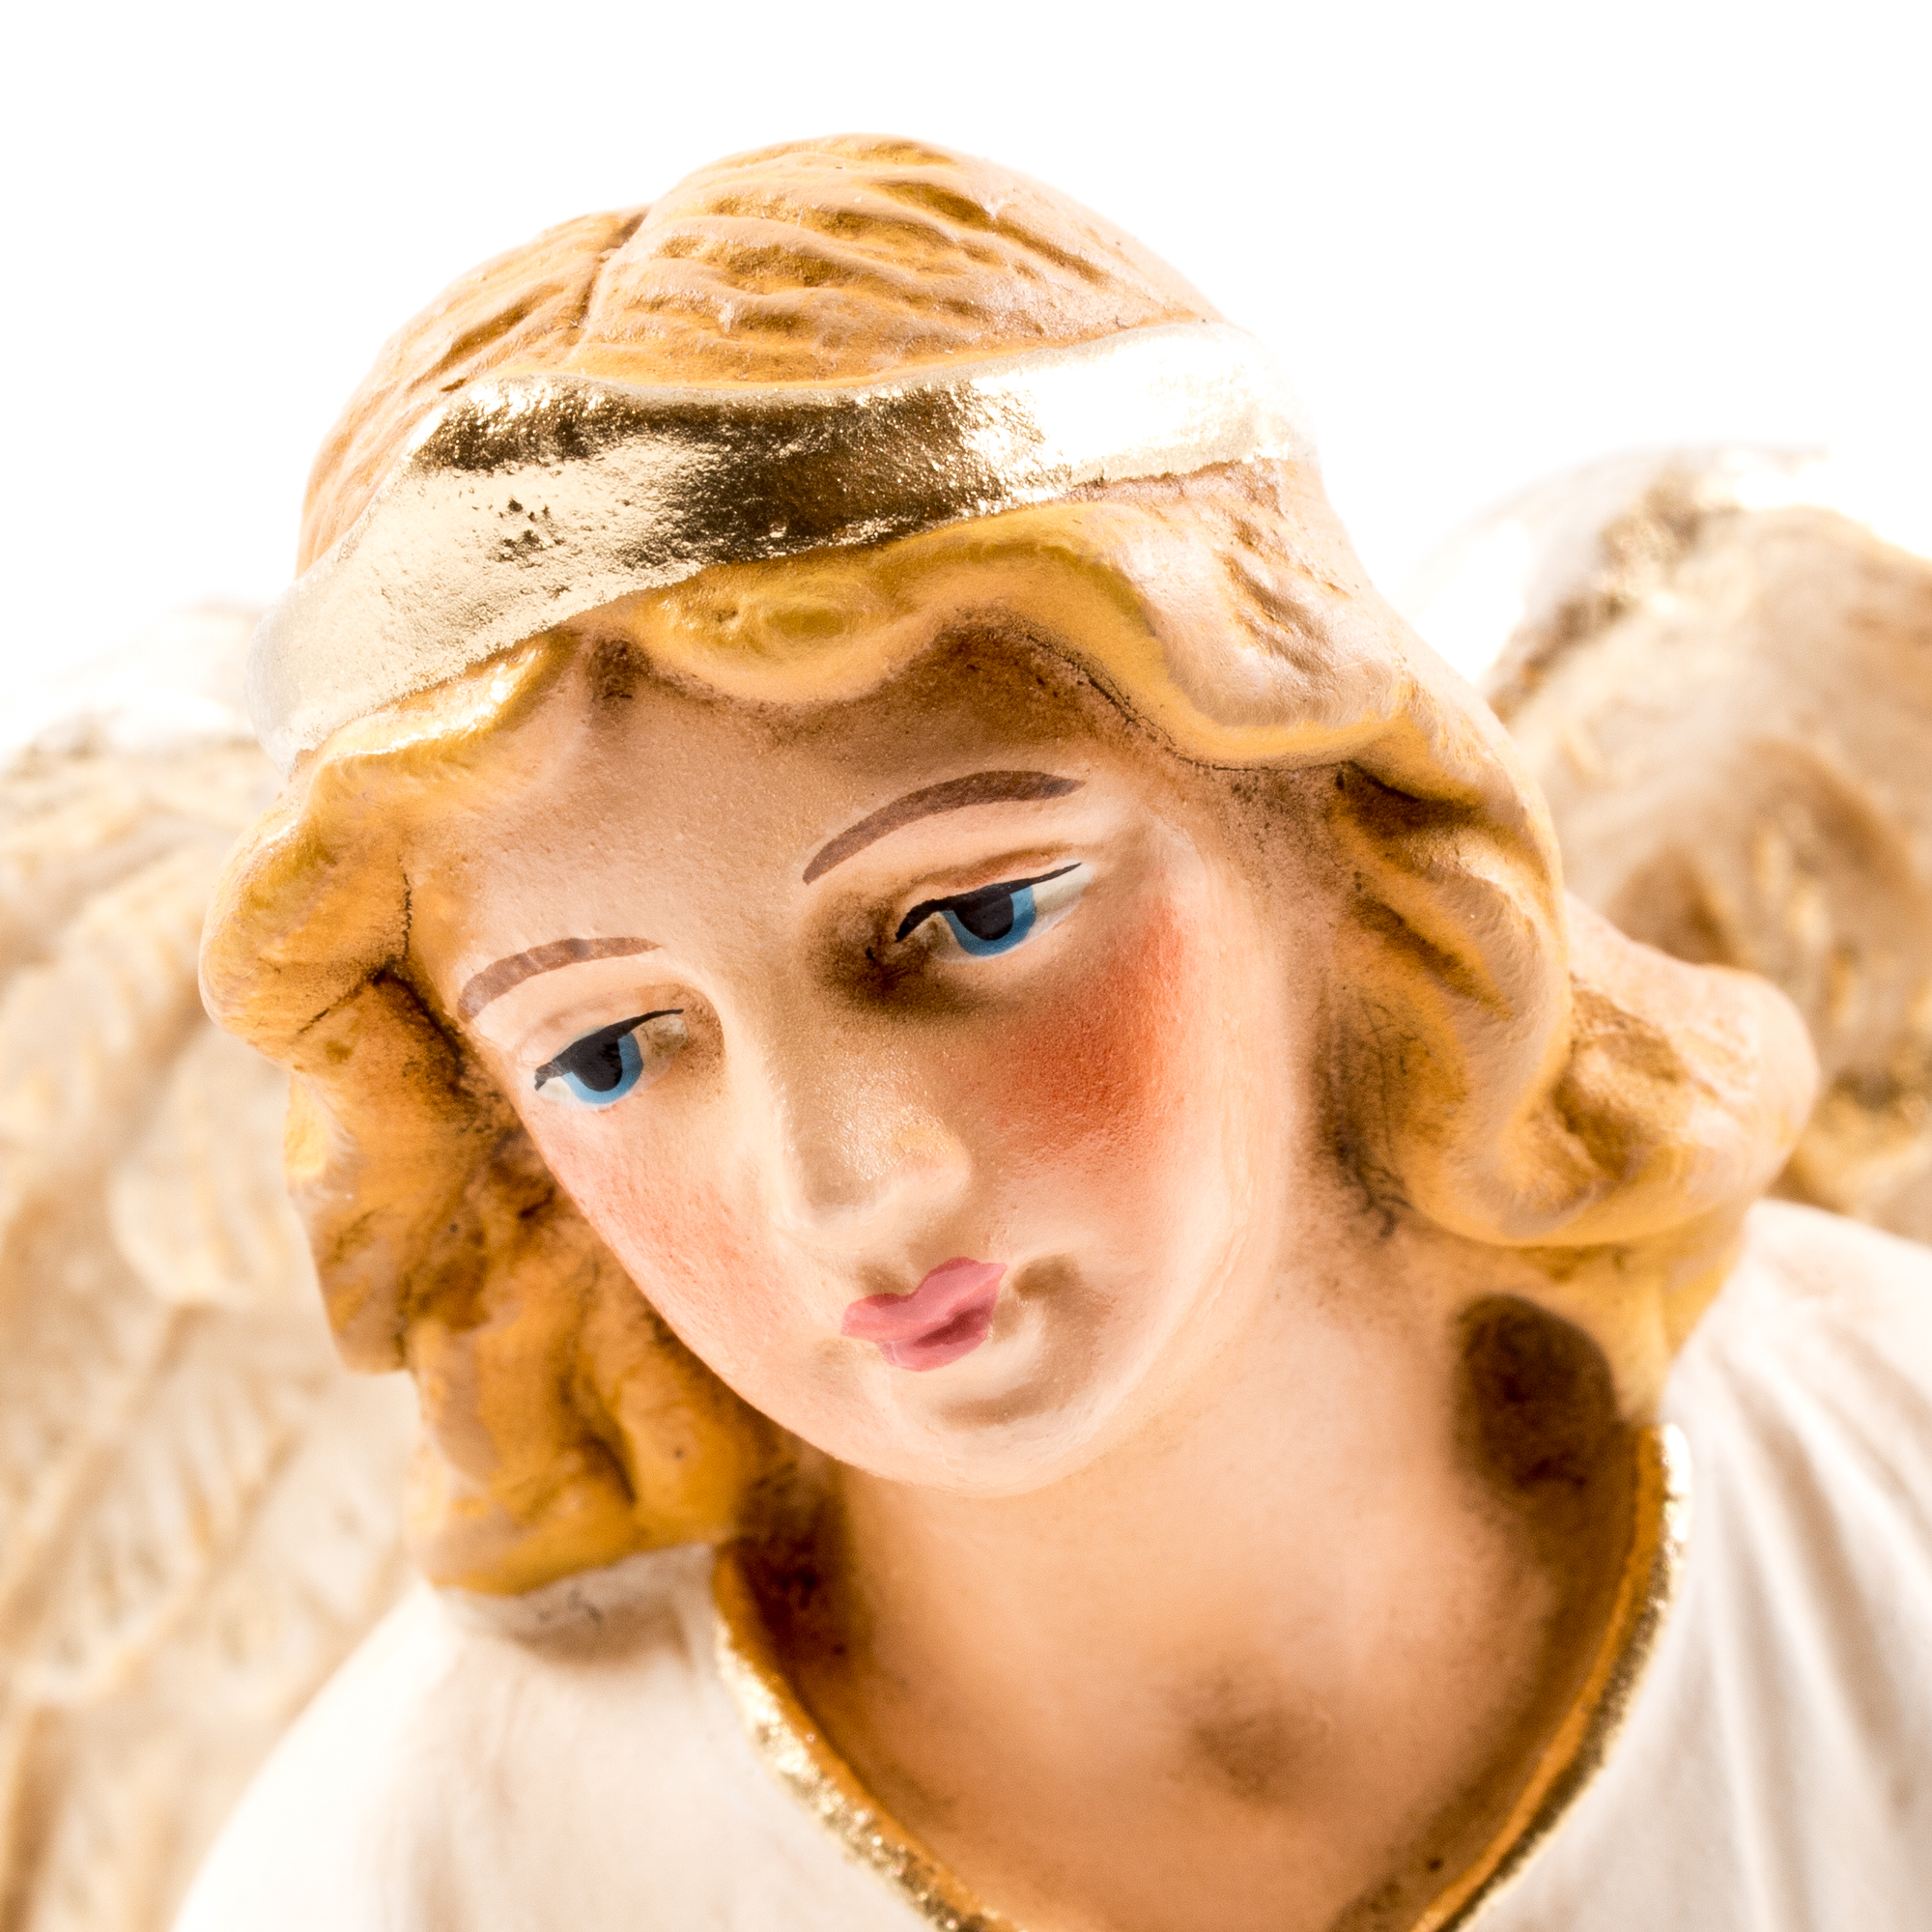 Proclaiming angel - Marolin papermaché - made in Germany